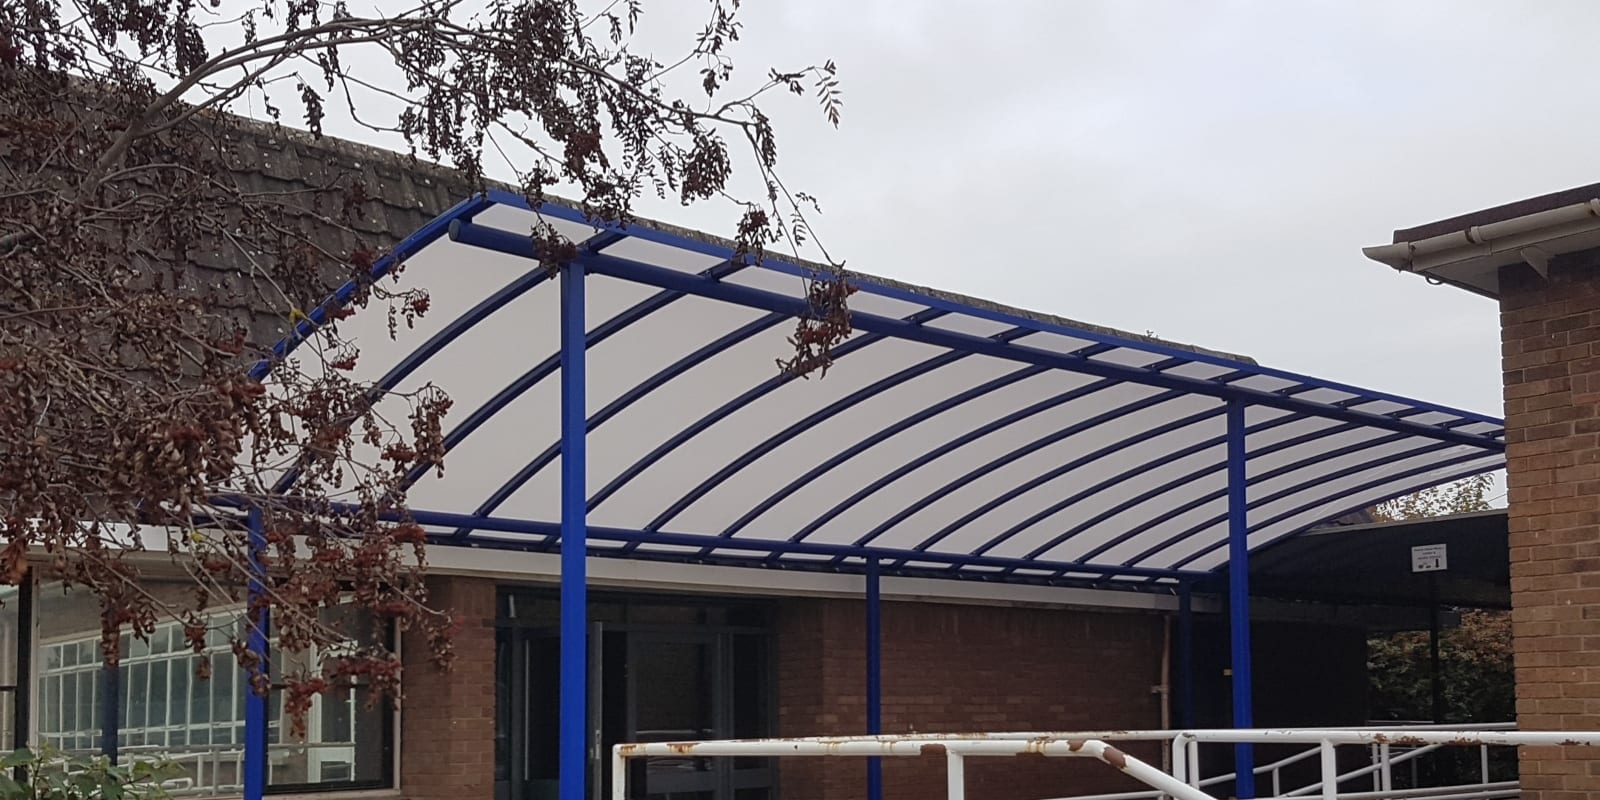 Idsall School Curved Roof Shelter